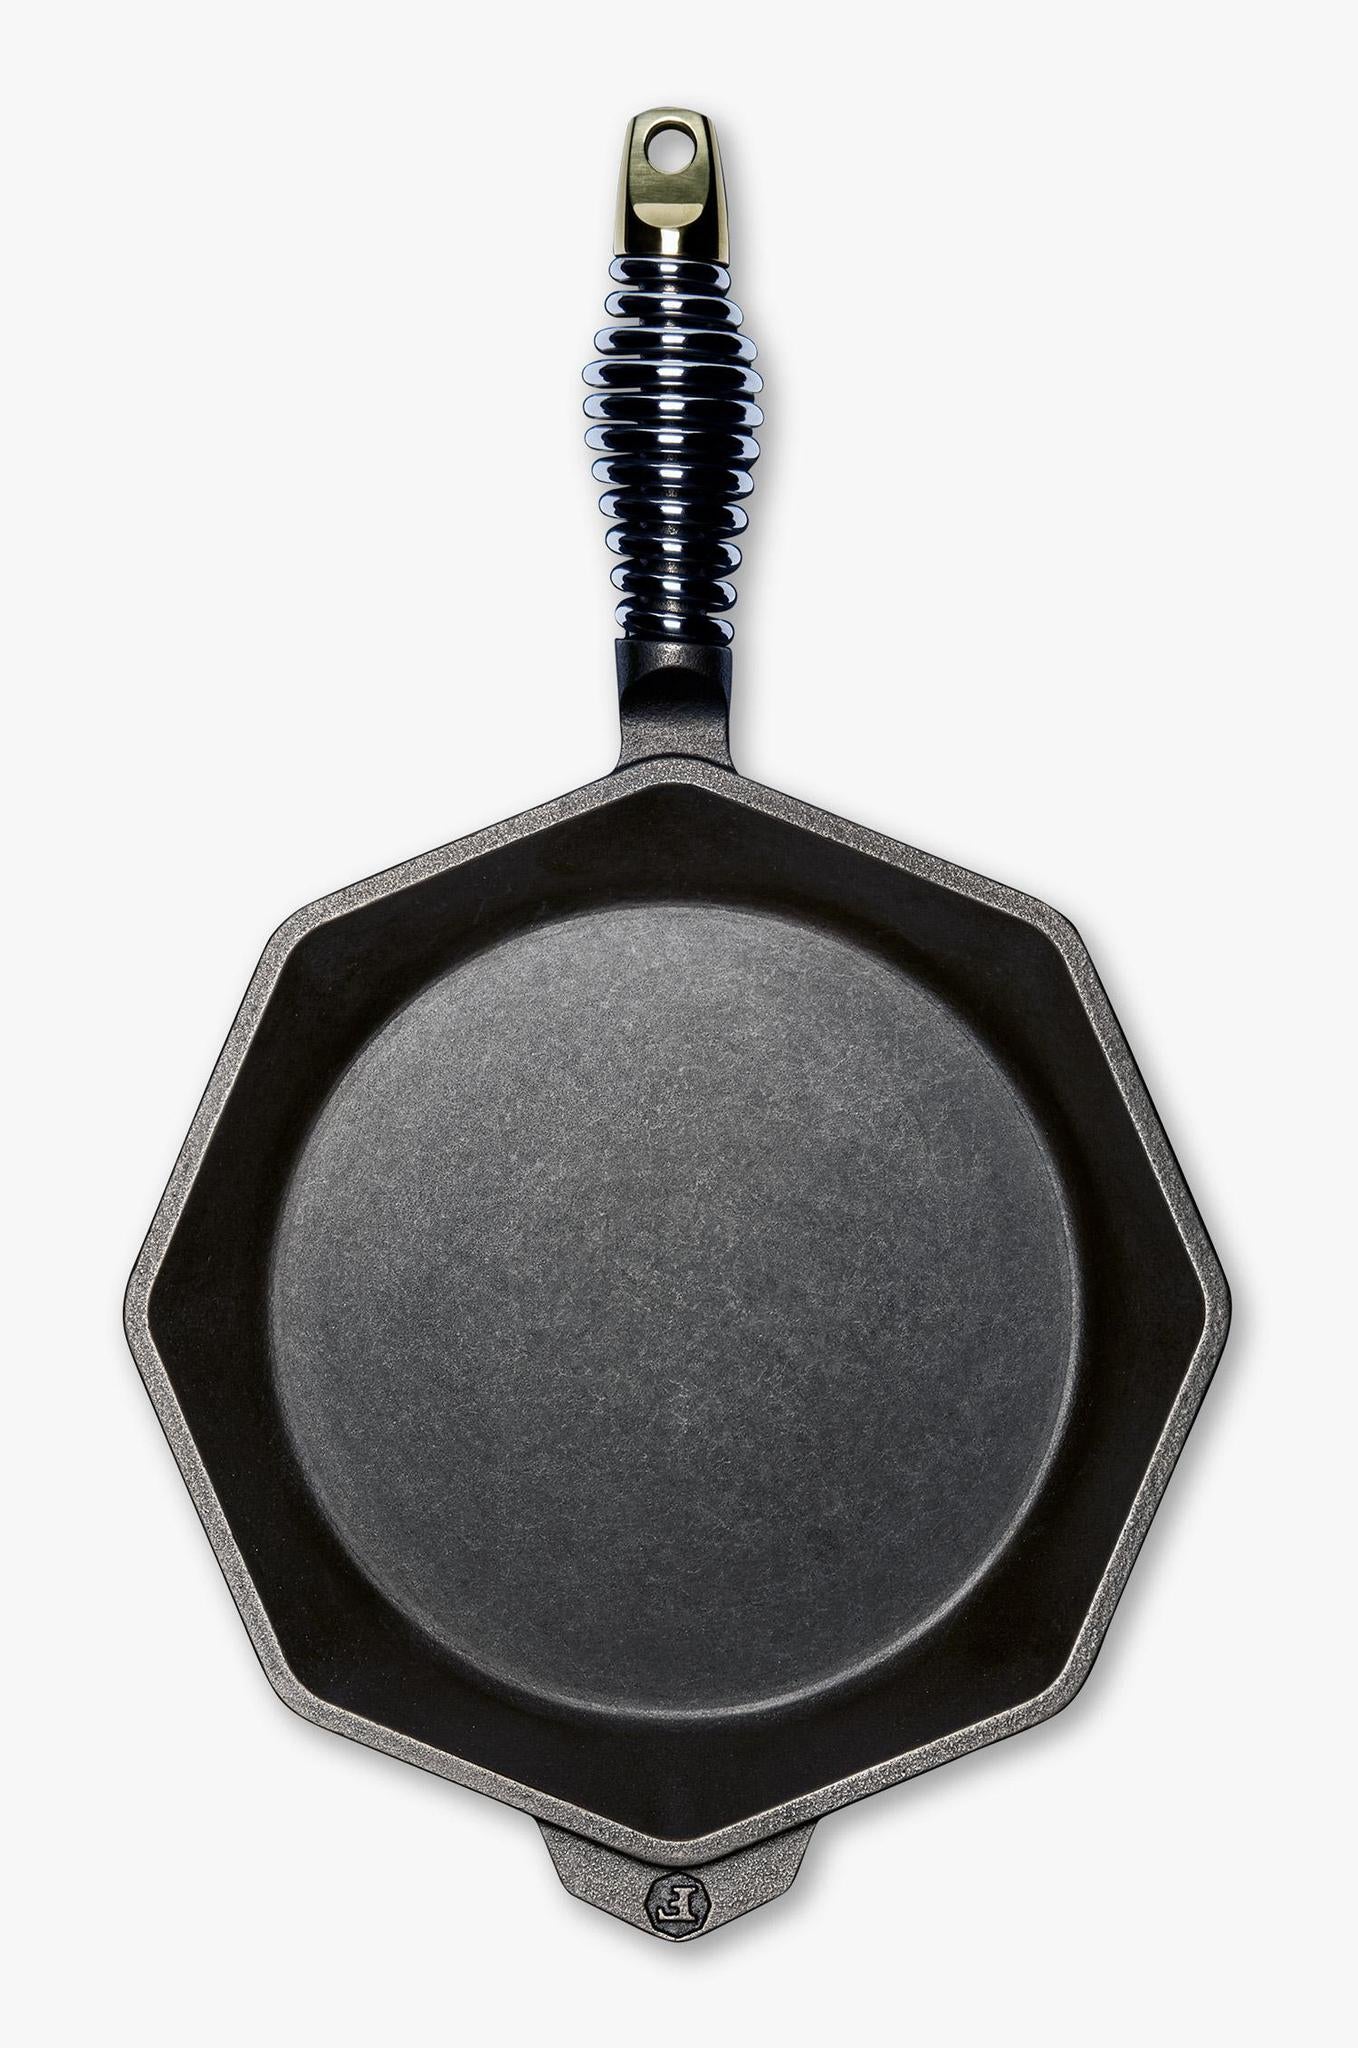 Finex 10 Cast Iron Skillet with Lid + Reviews